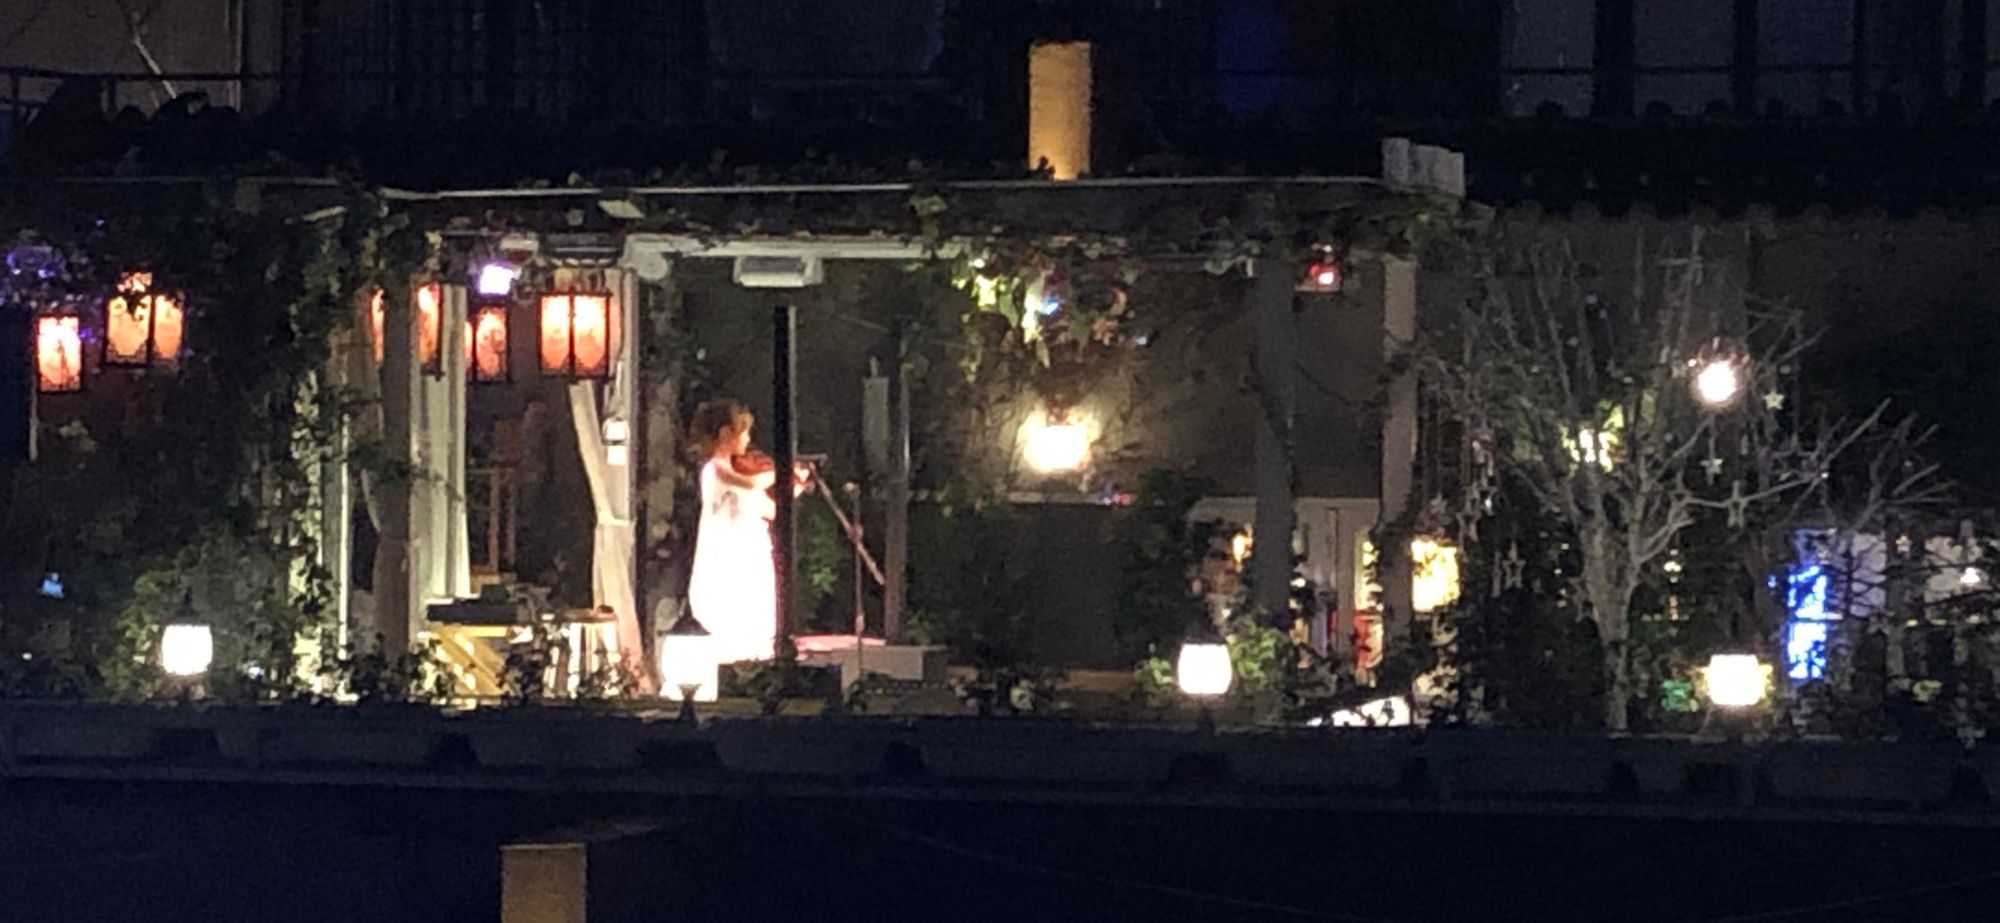 A violinst playing in a rooftop restaurant (Image by author)